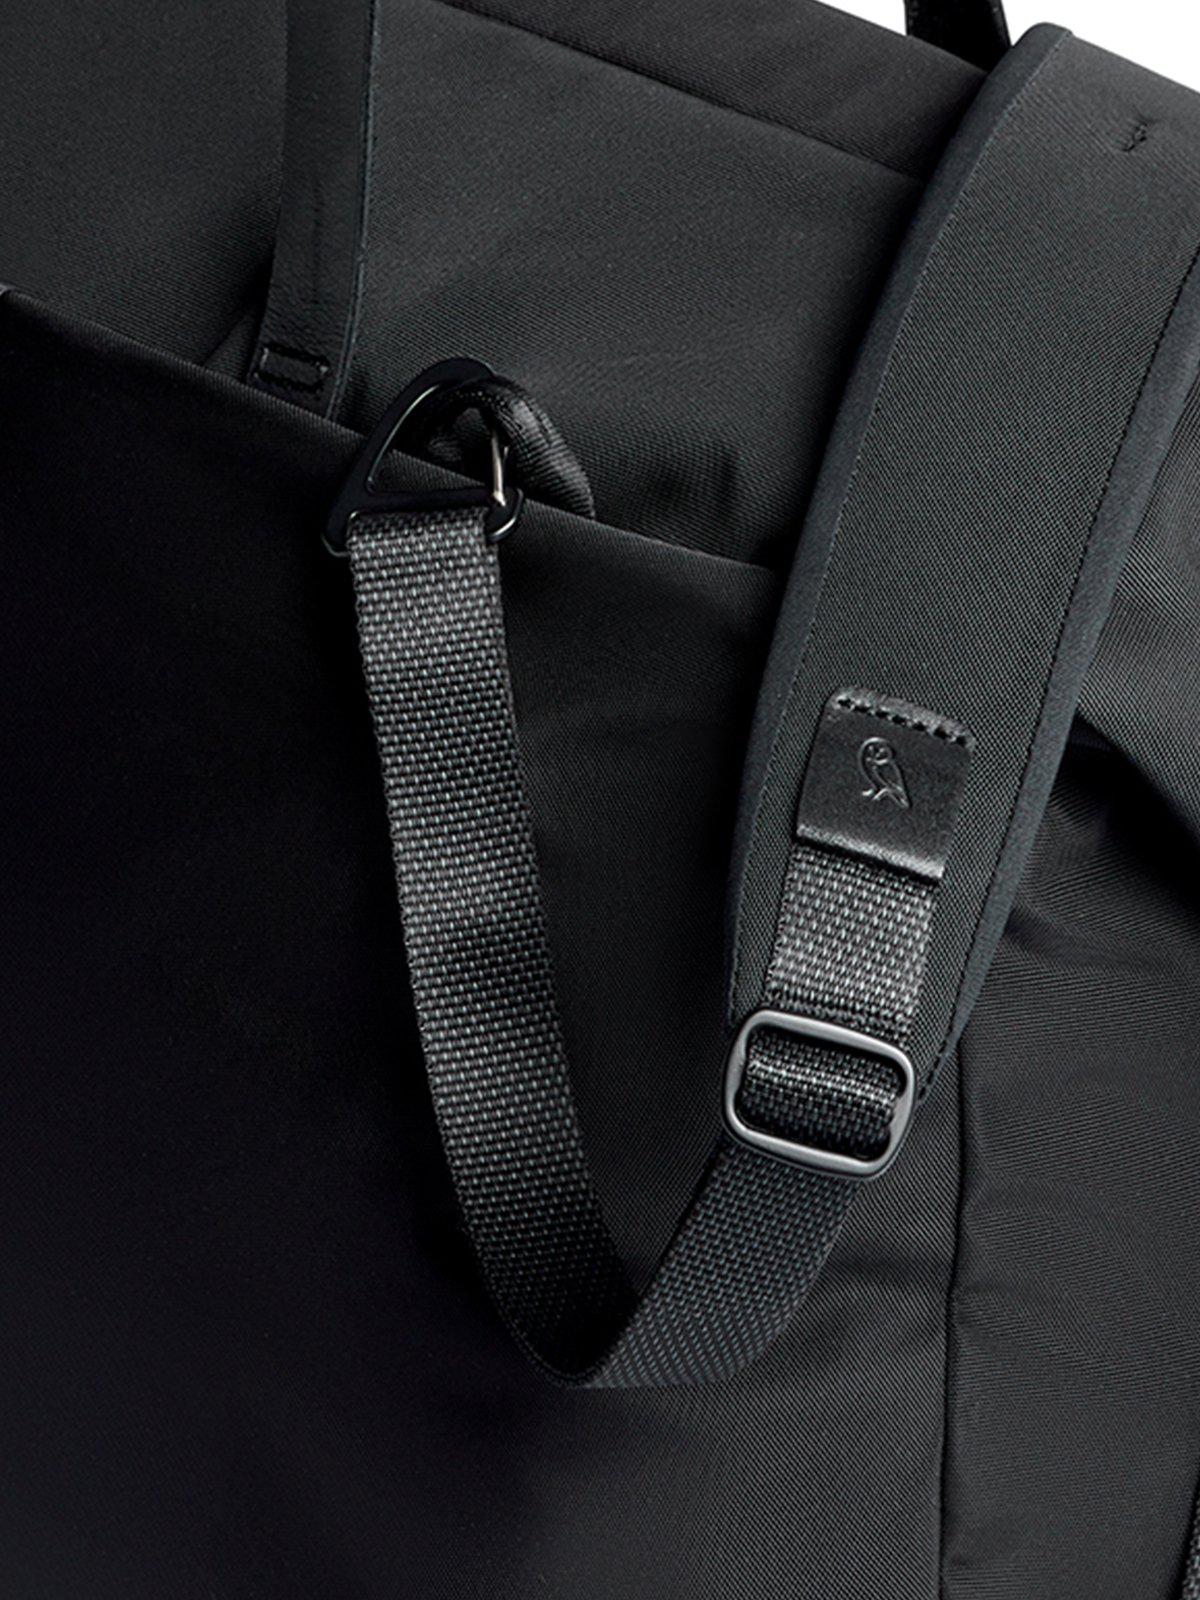 Bellroy Weekender Plus Black 45L - MORE by Morello Indonesia